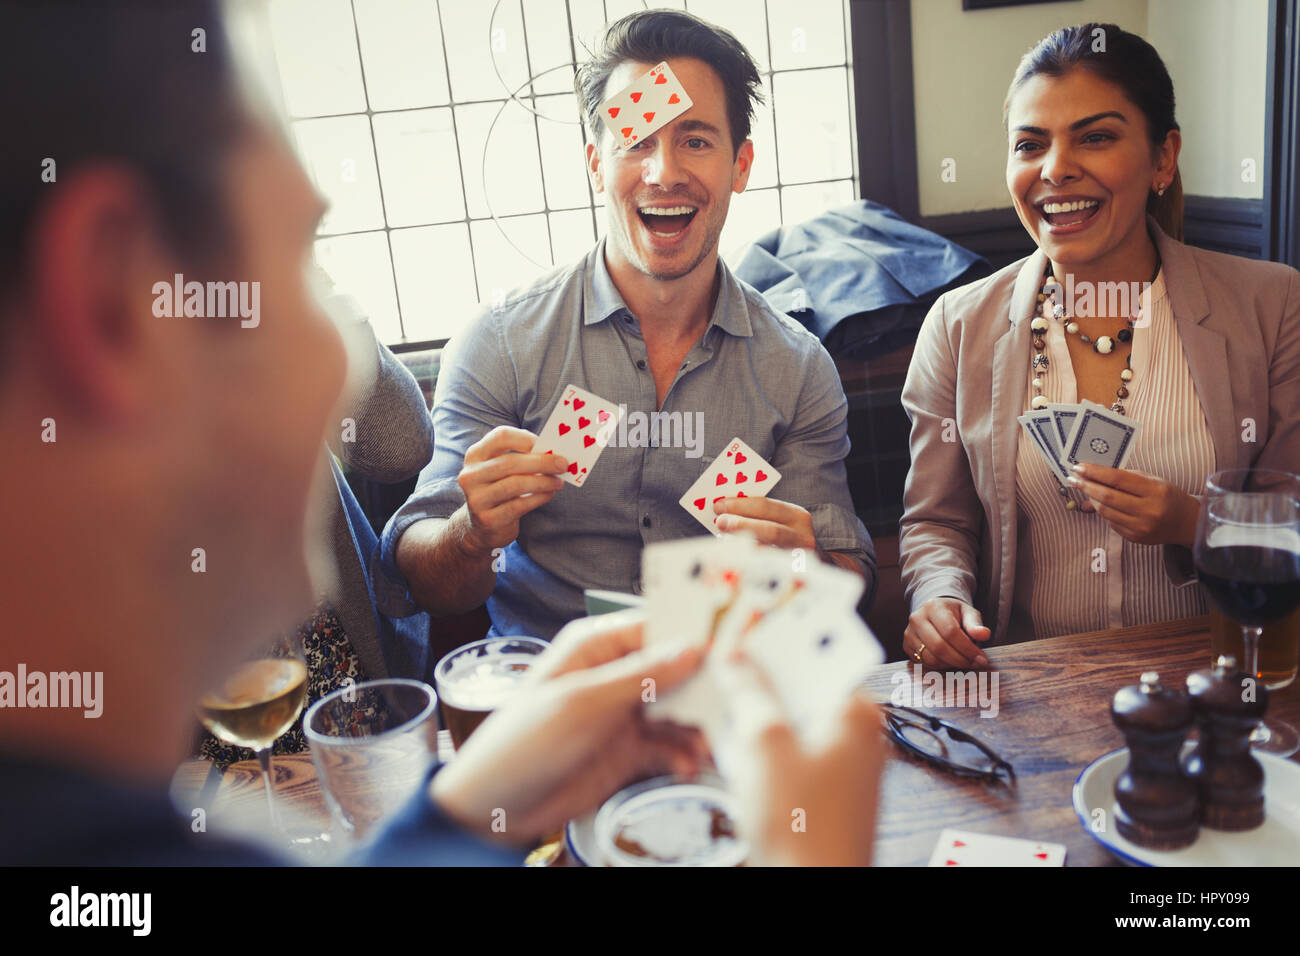 Friends playing Blind Man’s Bluff at bar Stock Photo